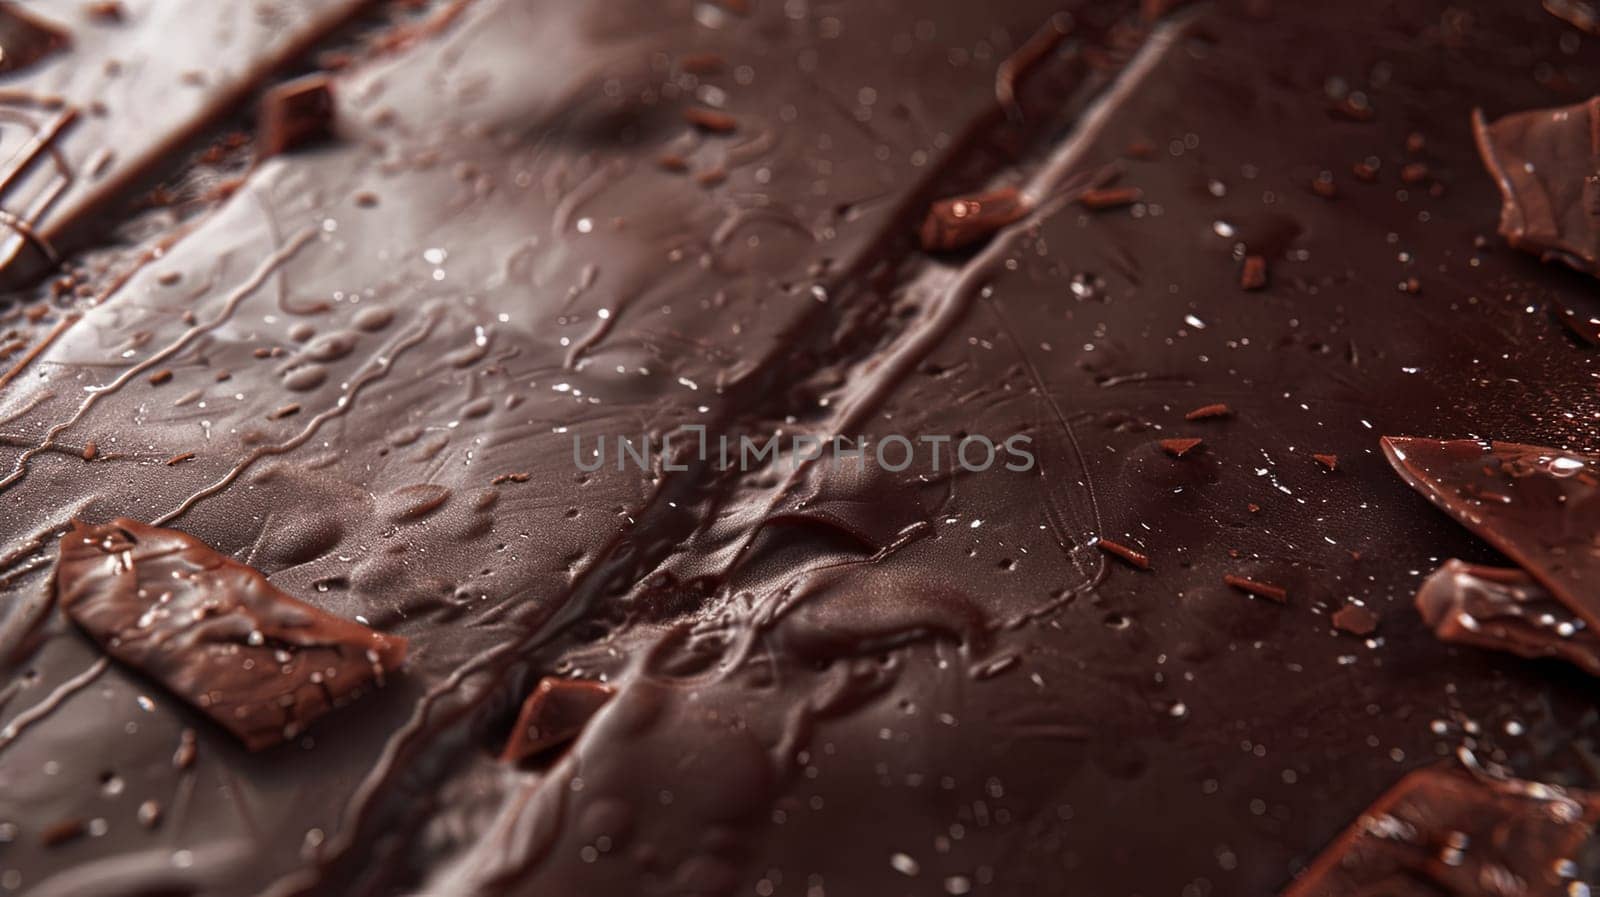 Detailed close-up of a perfectly even dark chocolate bar with visible break lines.